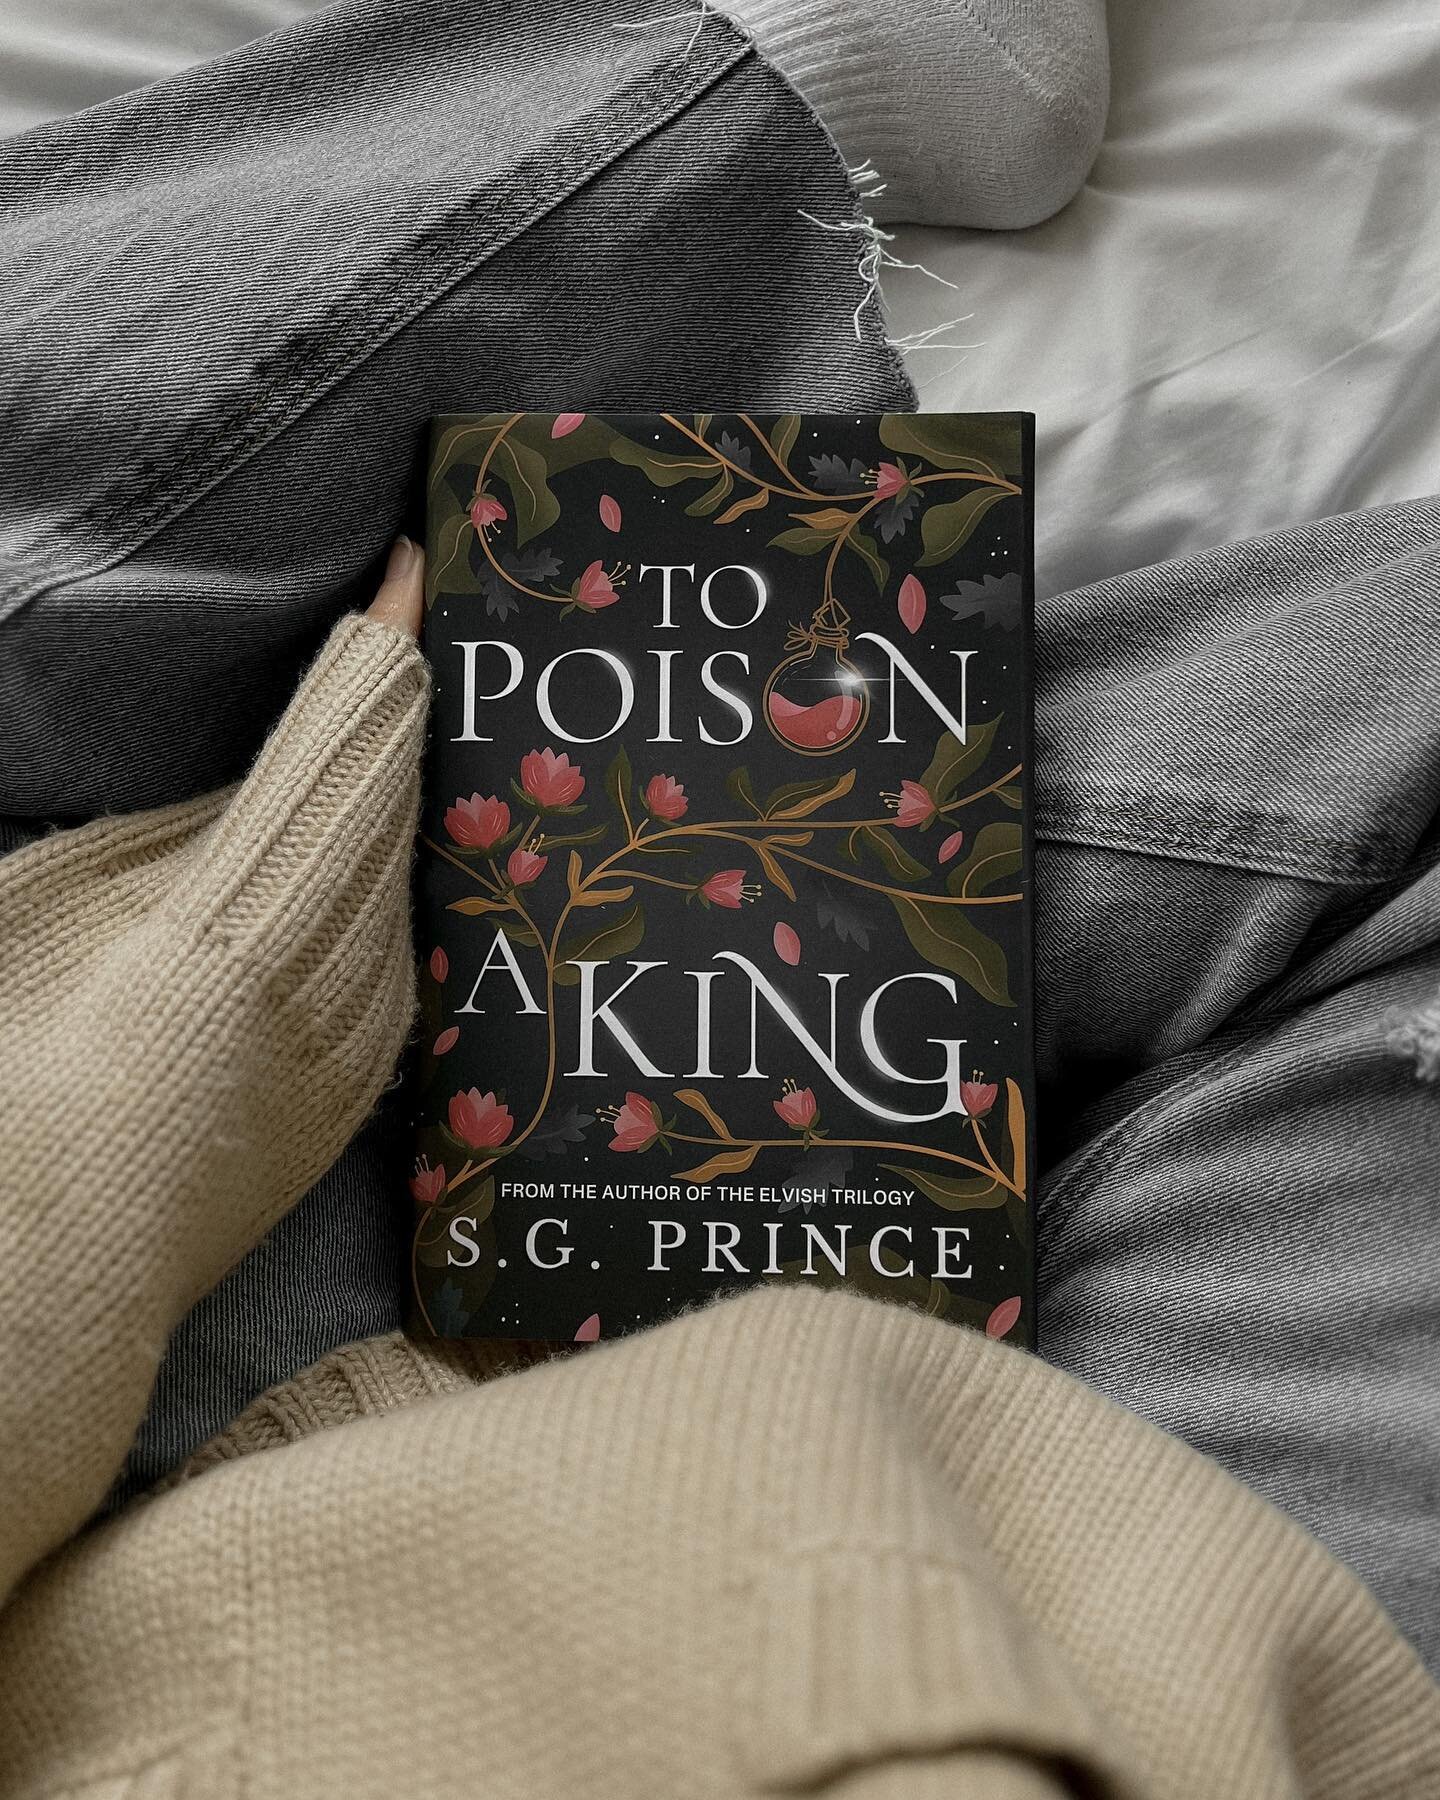 The first round of ARCs for To Poison a King have been sent! If you&rsquo;re one of my advanced readers, check your inbox &lt;3

I&rsquo;m moving tomorrow, so I&rsquo;ll be spending the rest of the week packing and getting settled in our new house. I